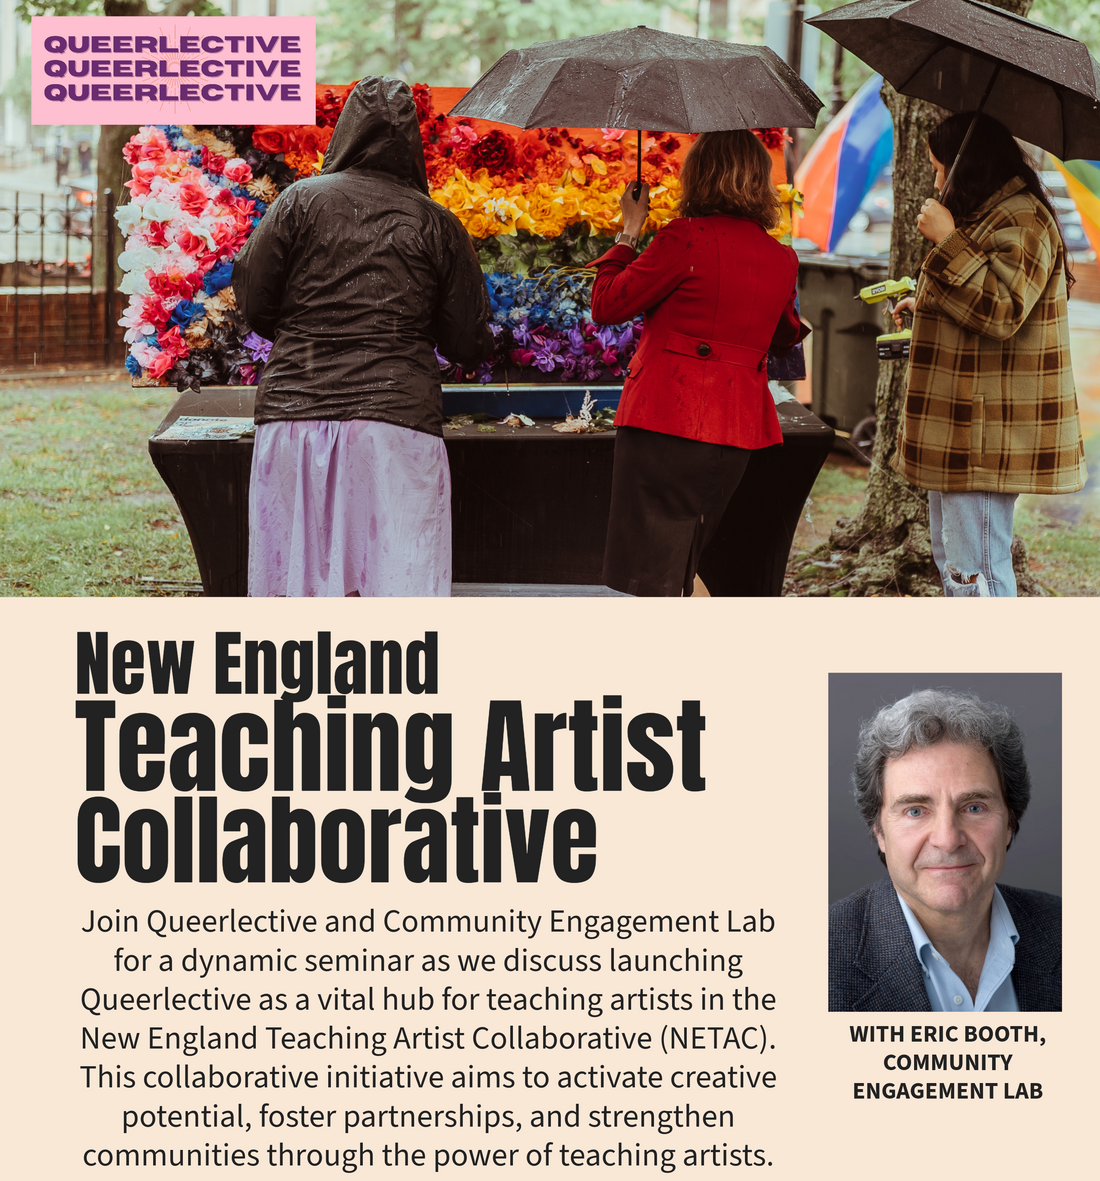 Insights into the New England Teaching Artist Collaborative Introduction